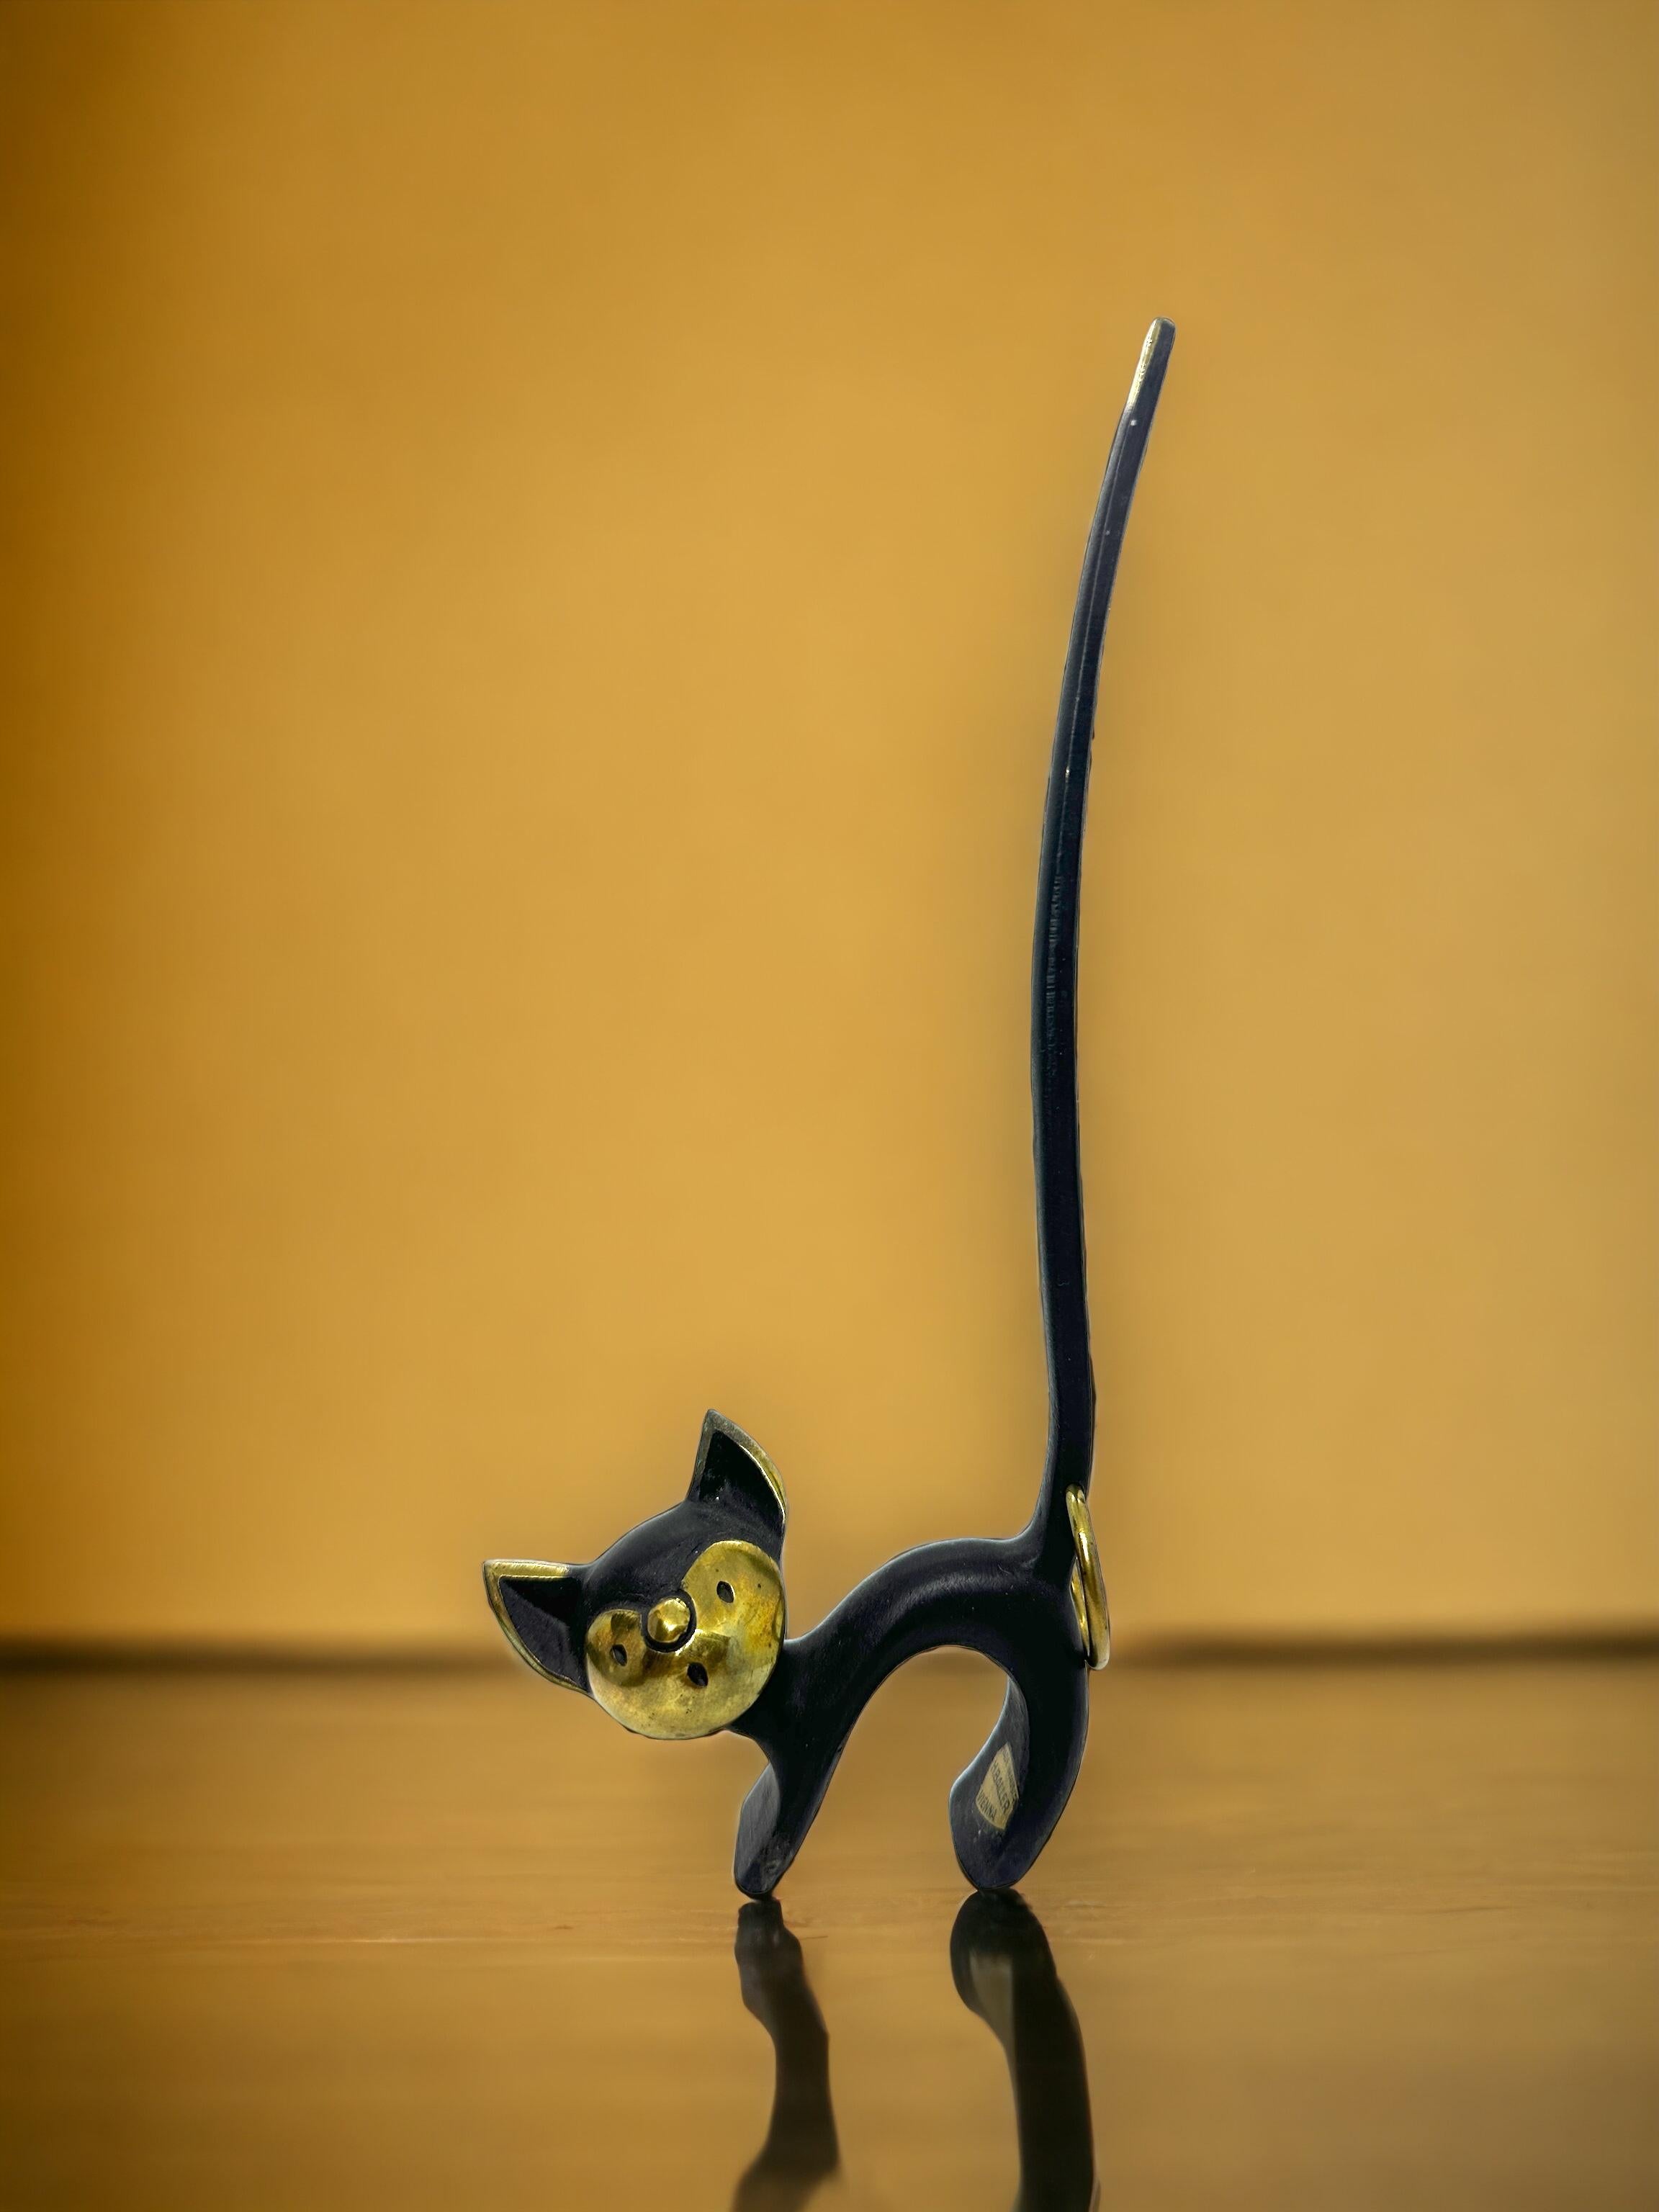 Classic early 1950s Austrian Bosse cat Figurine Collectible. Nice addition to your room or just for your collection of Austrian bronze items. Found at an estate sale in Vienna, Austria.
About:
Walter Bosse was an Austrian designer known for his